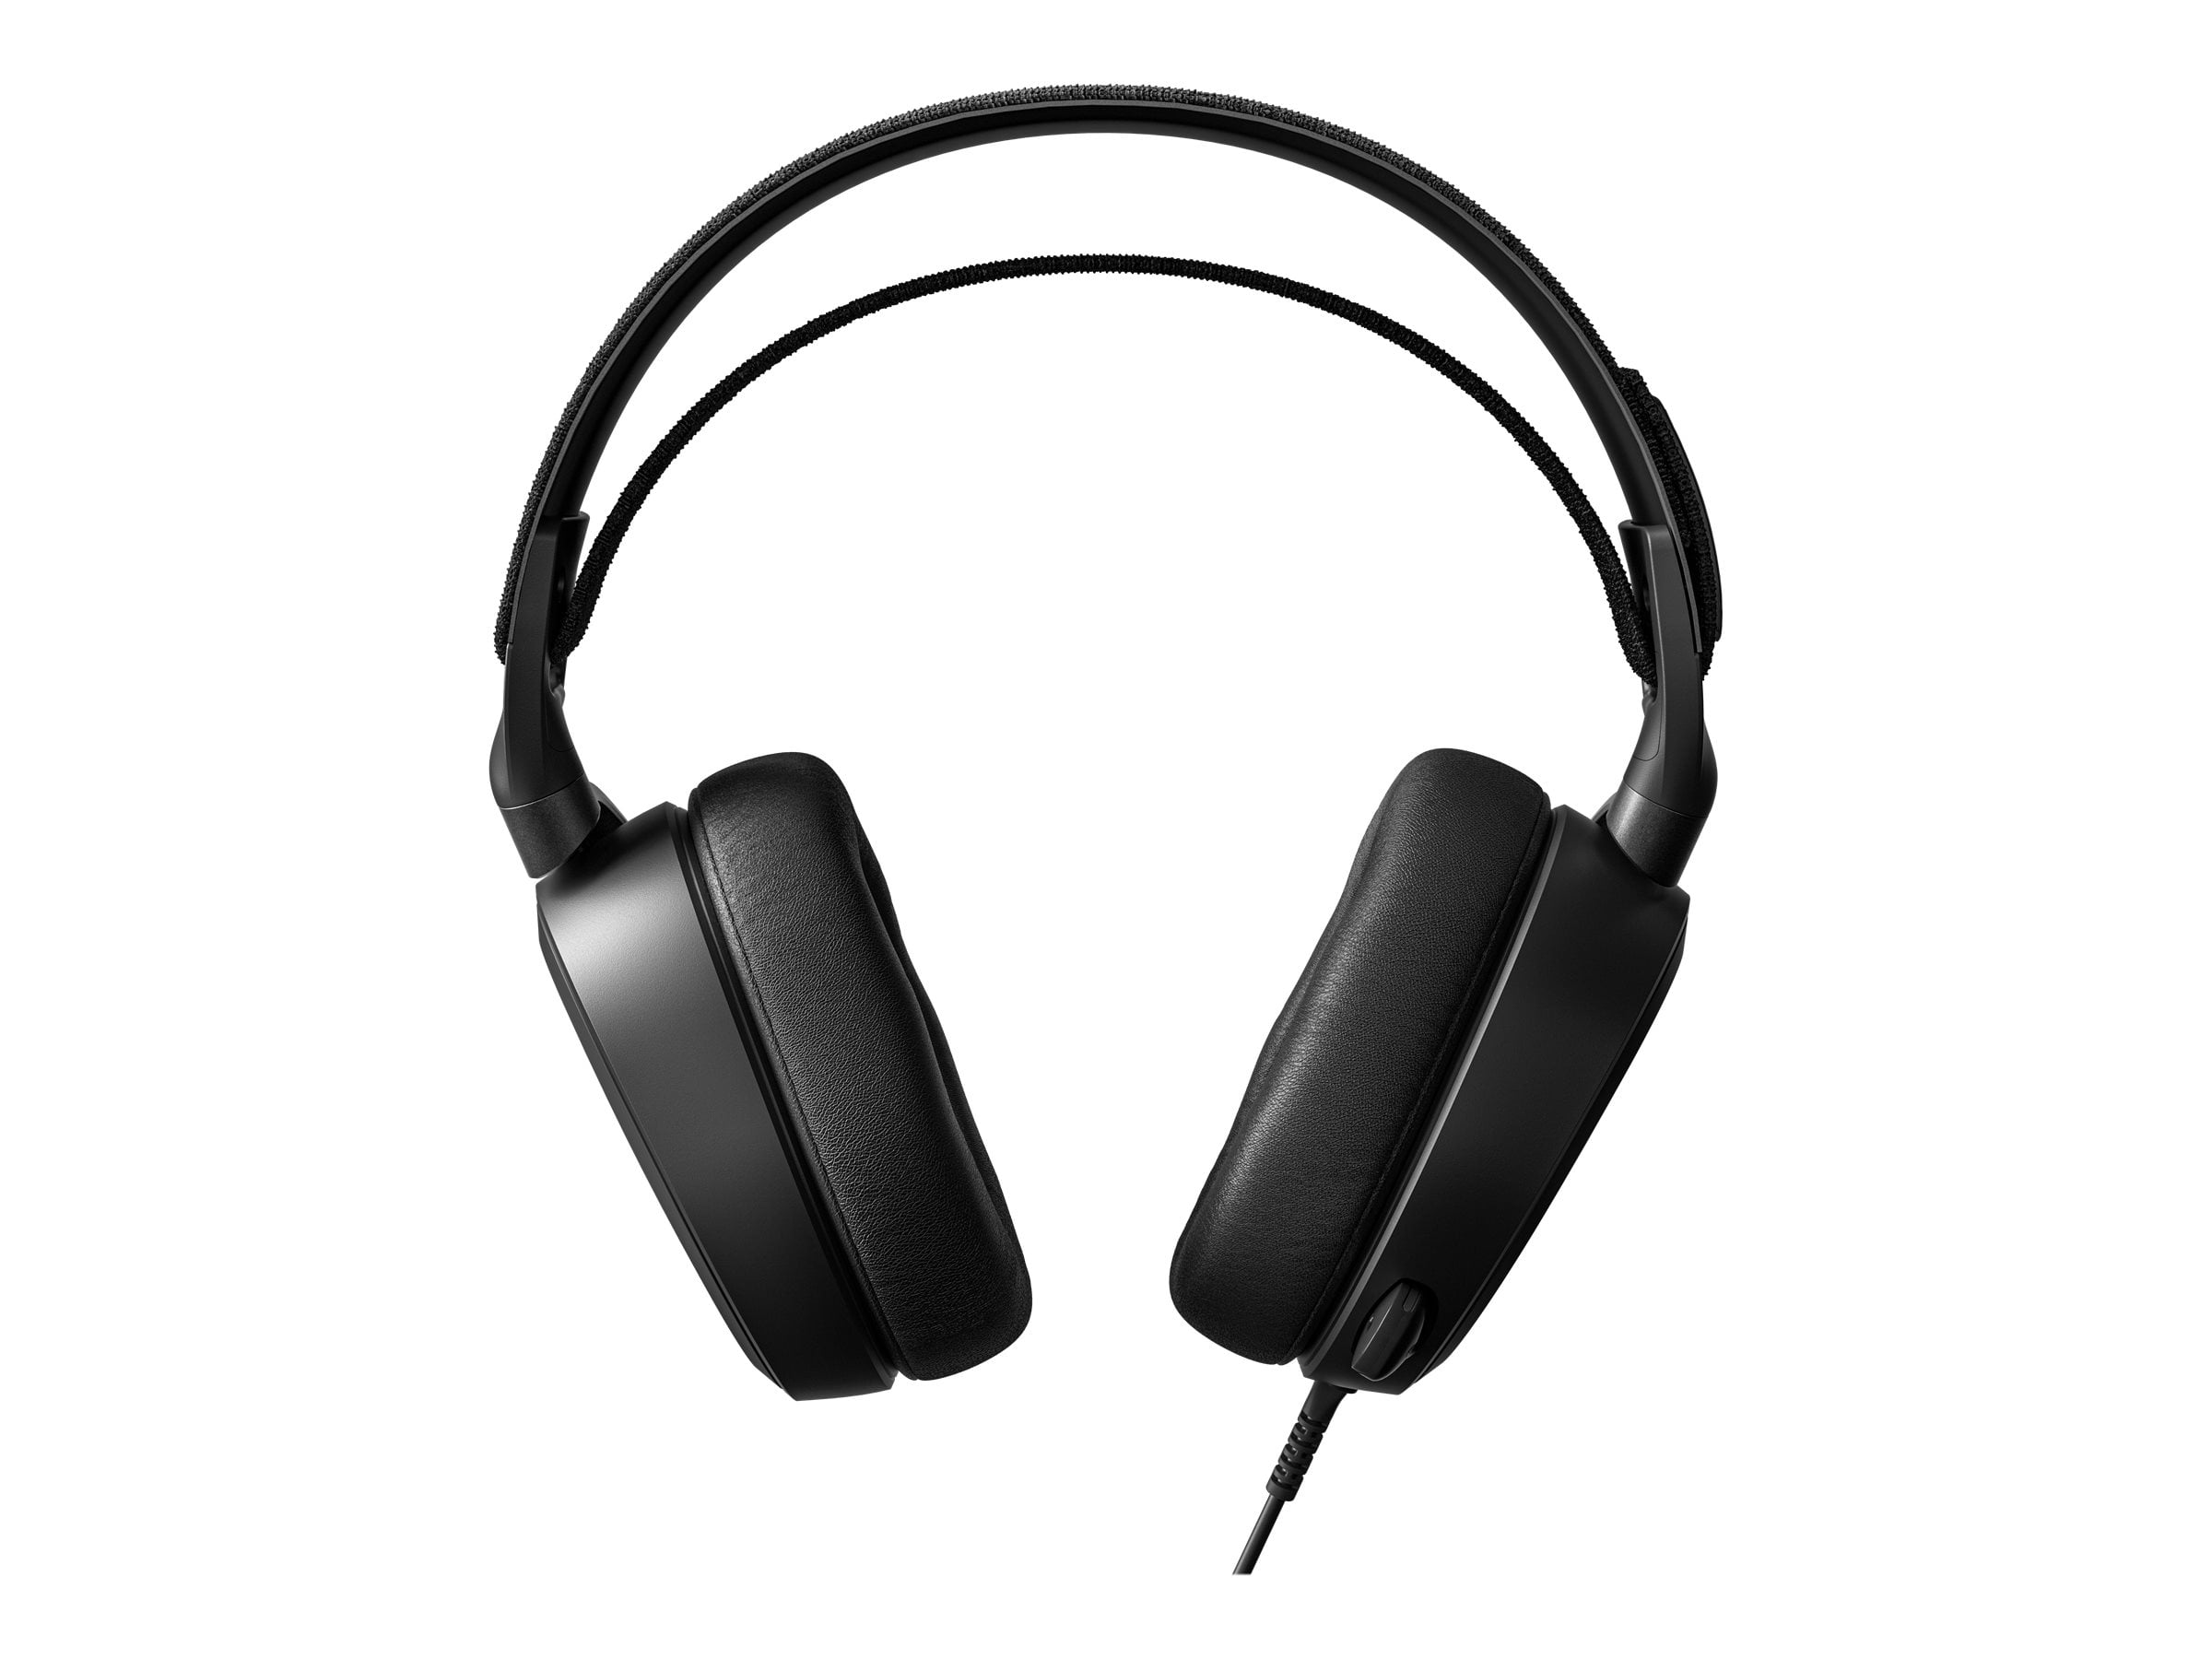  SteelSeries Arctis Prime - Competitive Gaming Headset